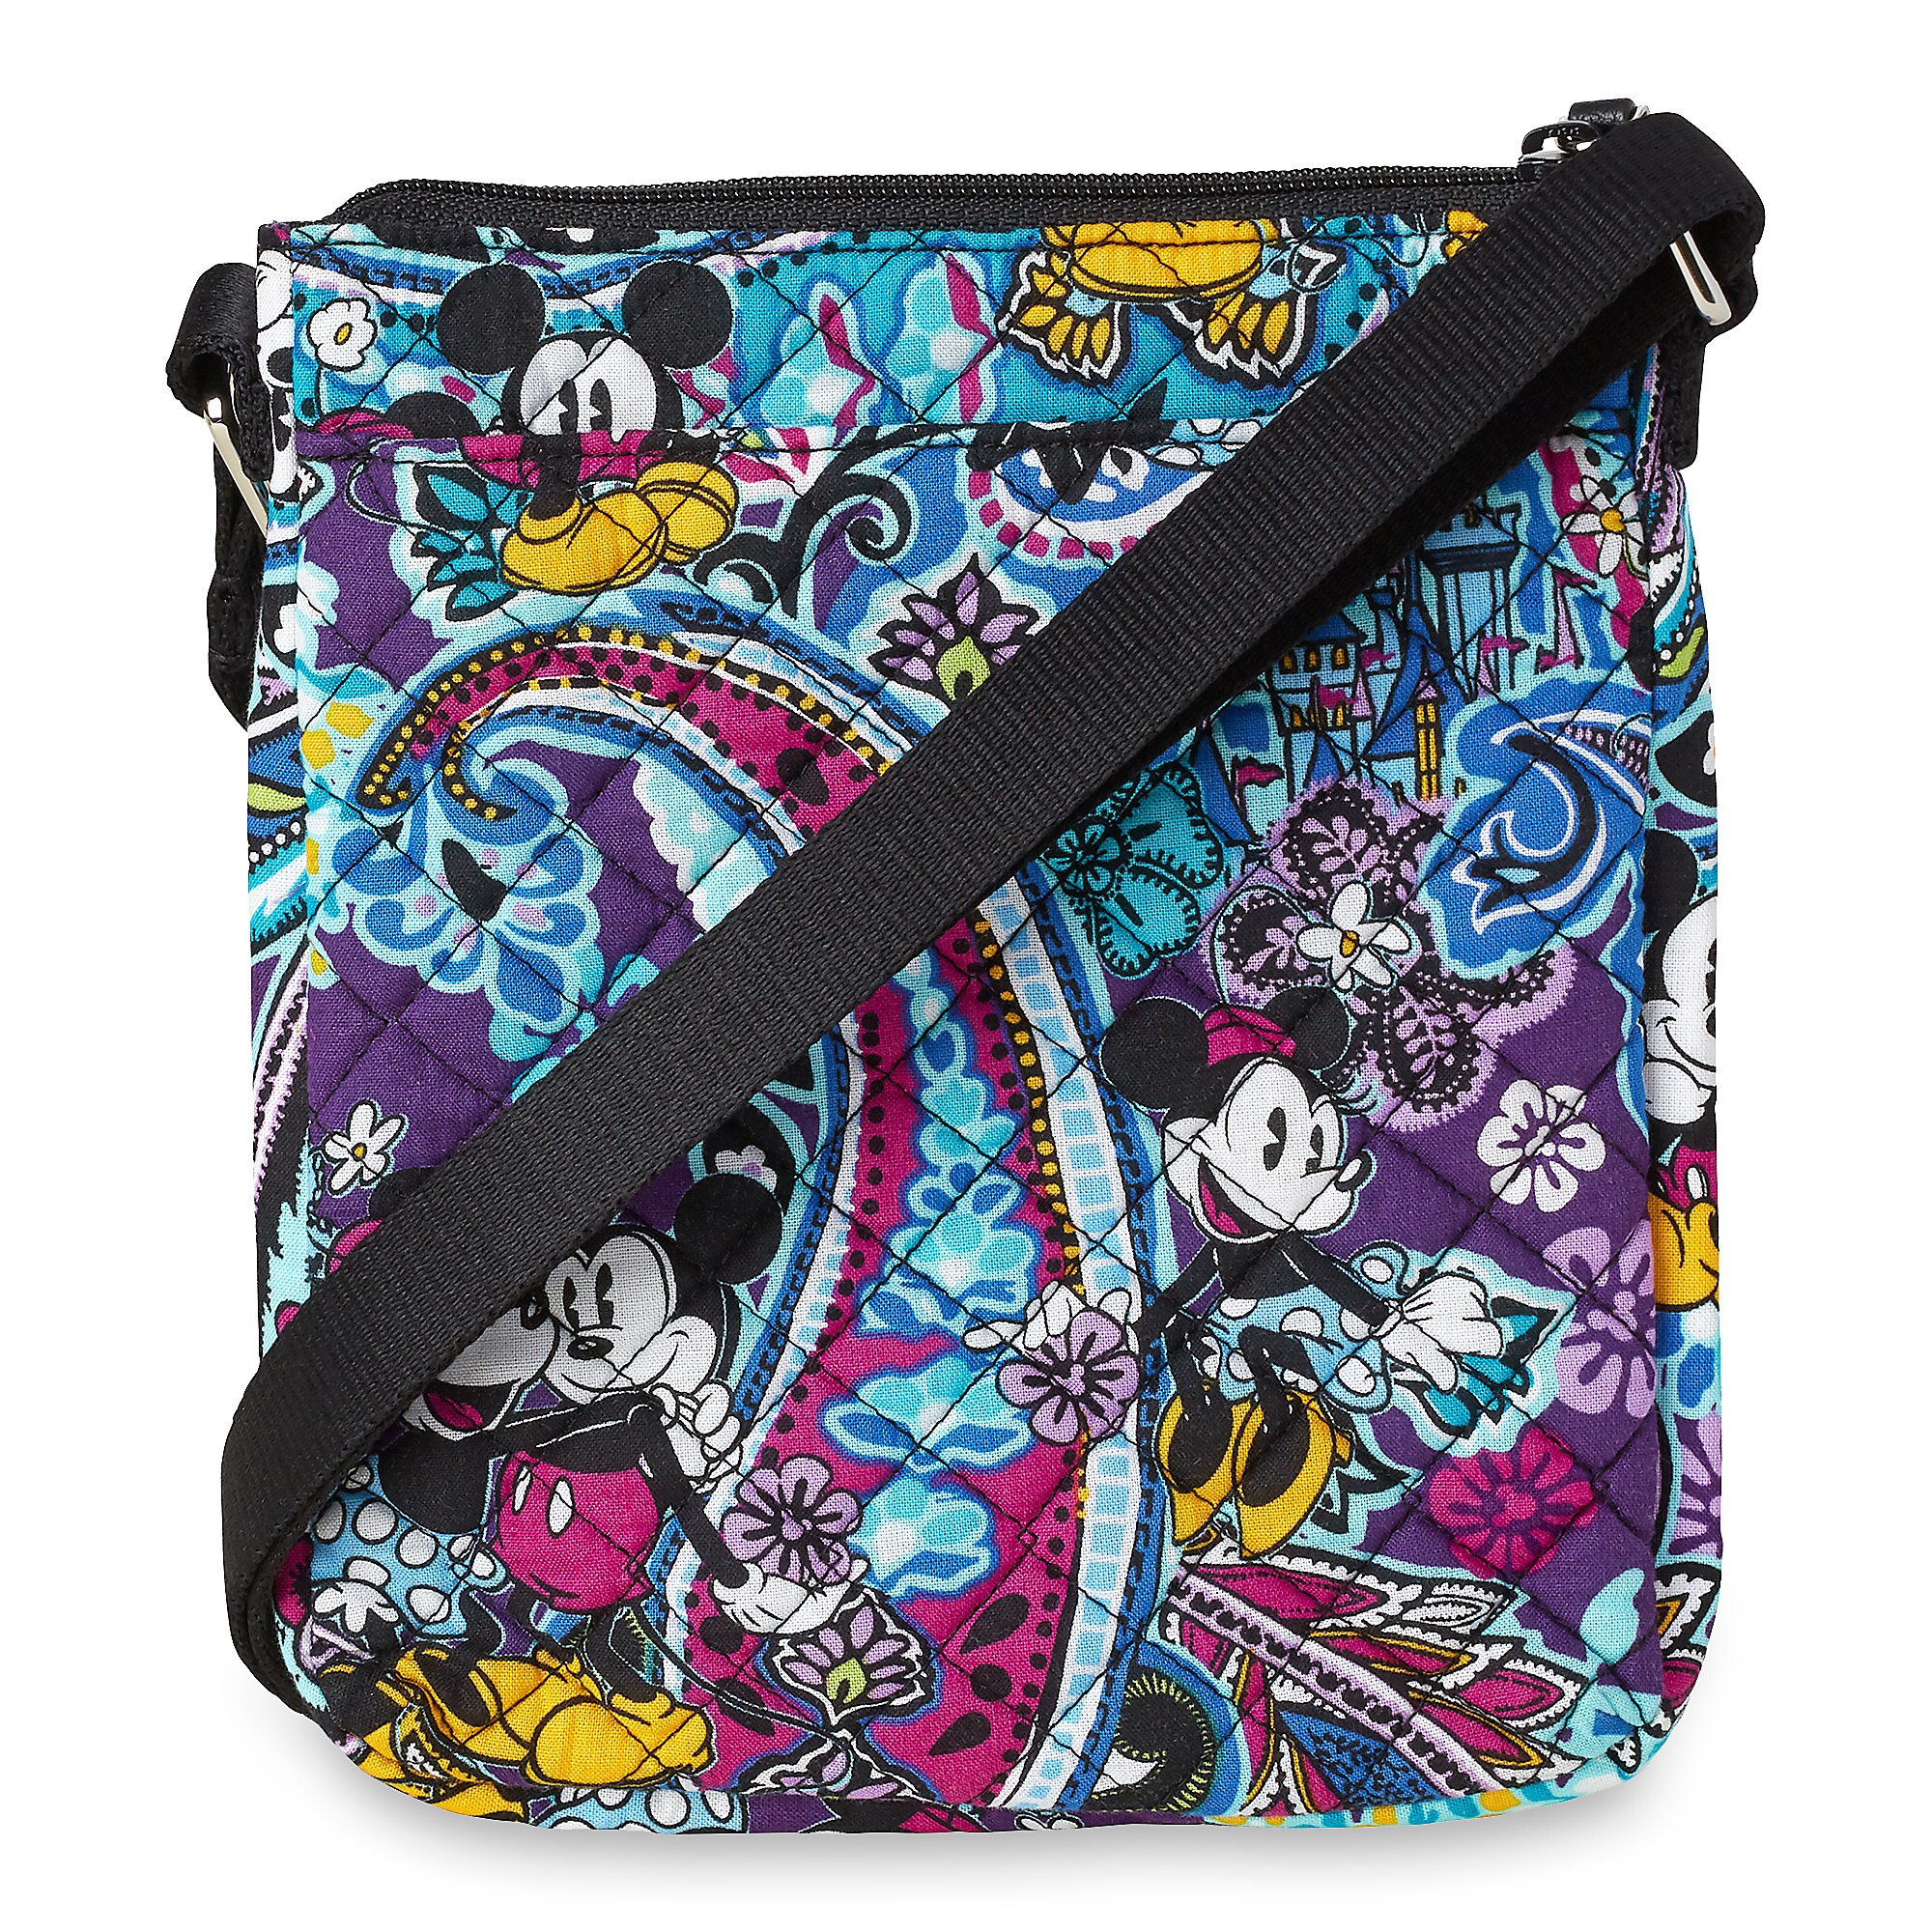 Mickey and Minnie Mouse Paisley Mini Hipster Bag by Vera Bradley has hit the shelves for ...